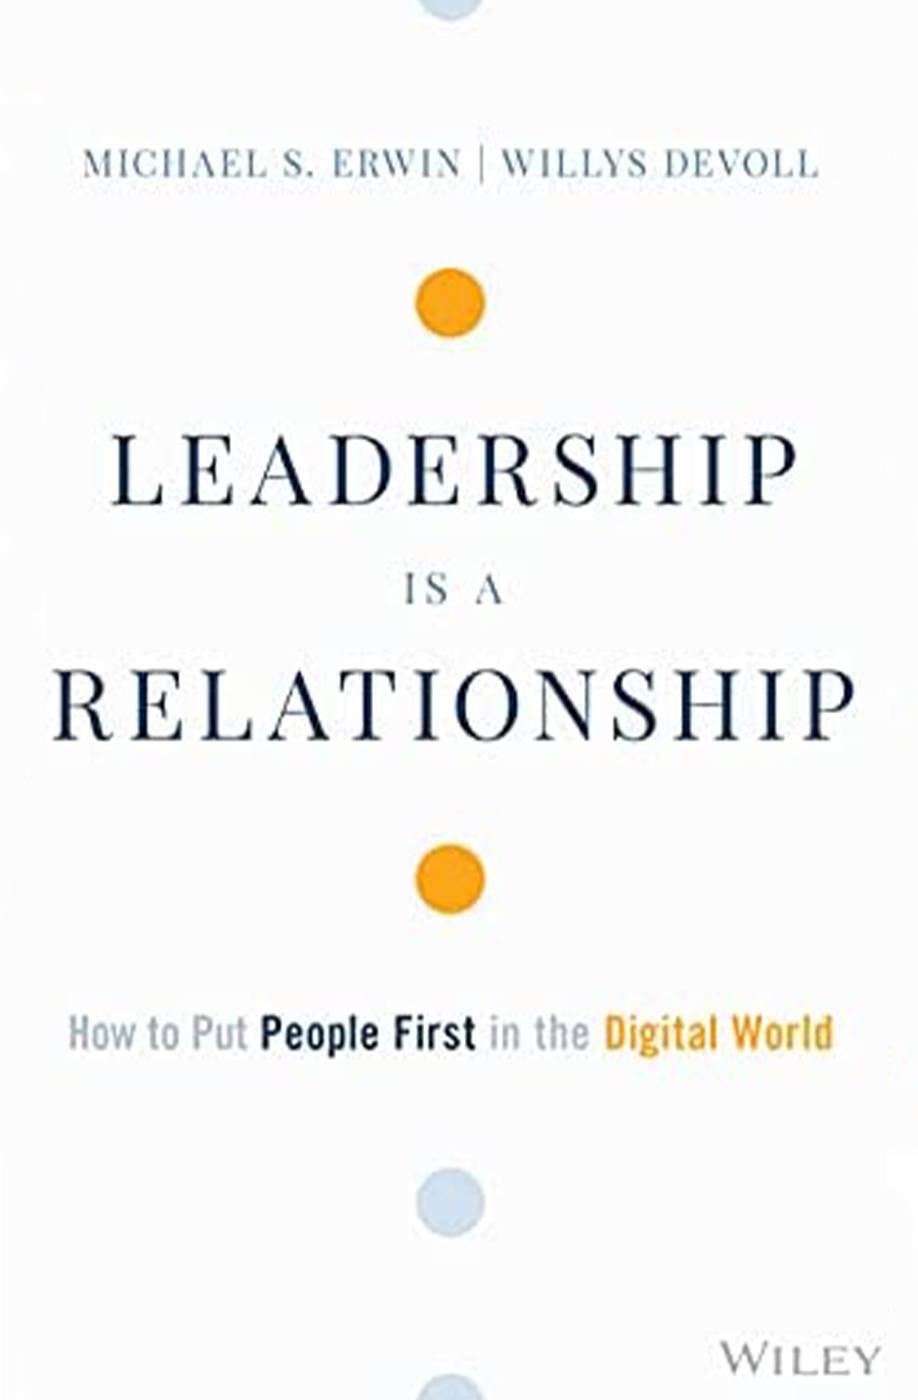 Leadership Is a Relationship: How to Put People First in the Digital World, by Mike Erwin and Willys Devoll